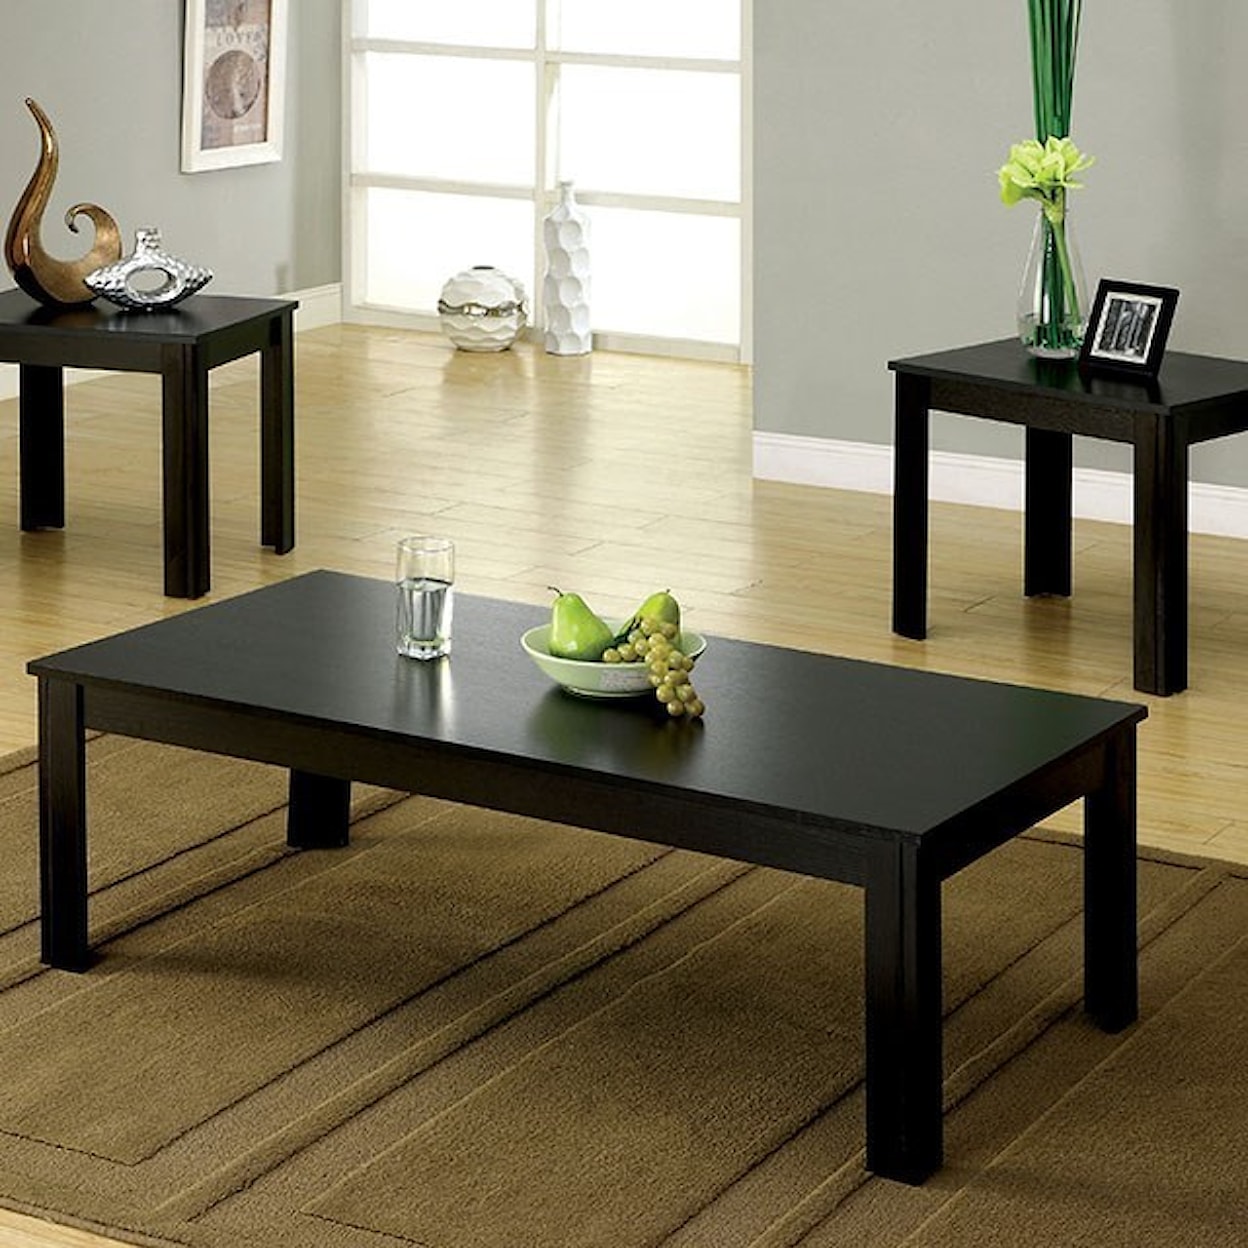 Furniture of America Bay Square 3 Piece Table Set